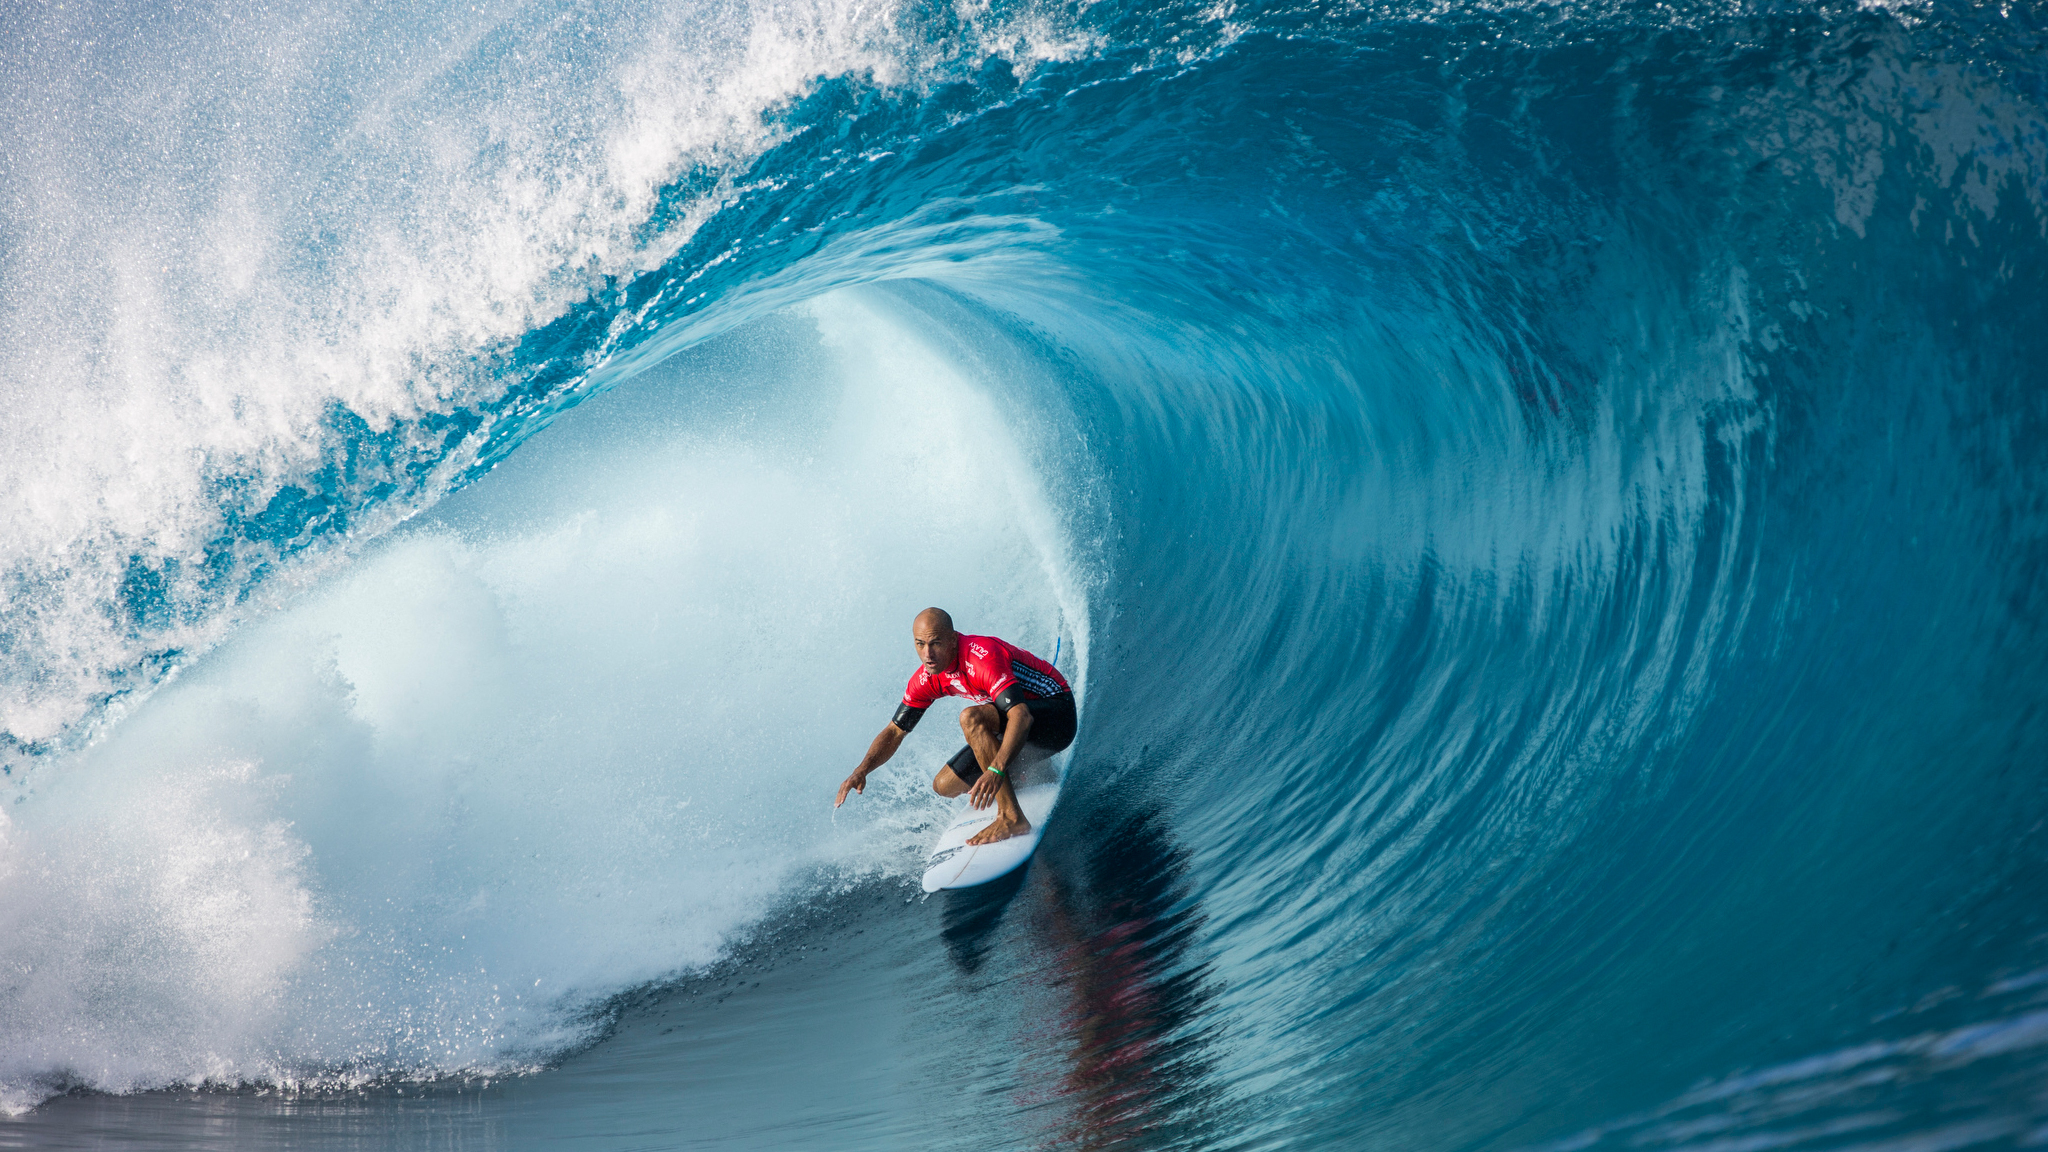 Kelly Slater at Teahupoo, Tahiti where we placed 2nd this year, surf